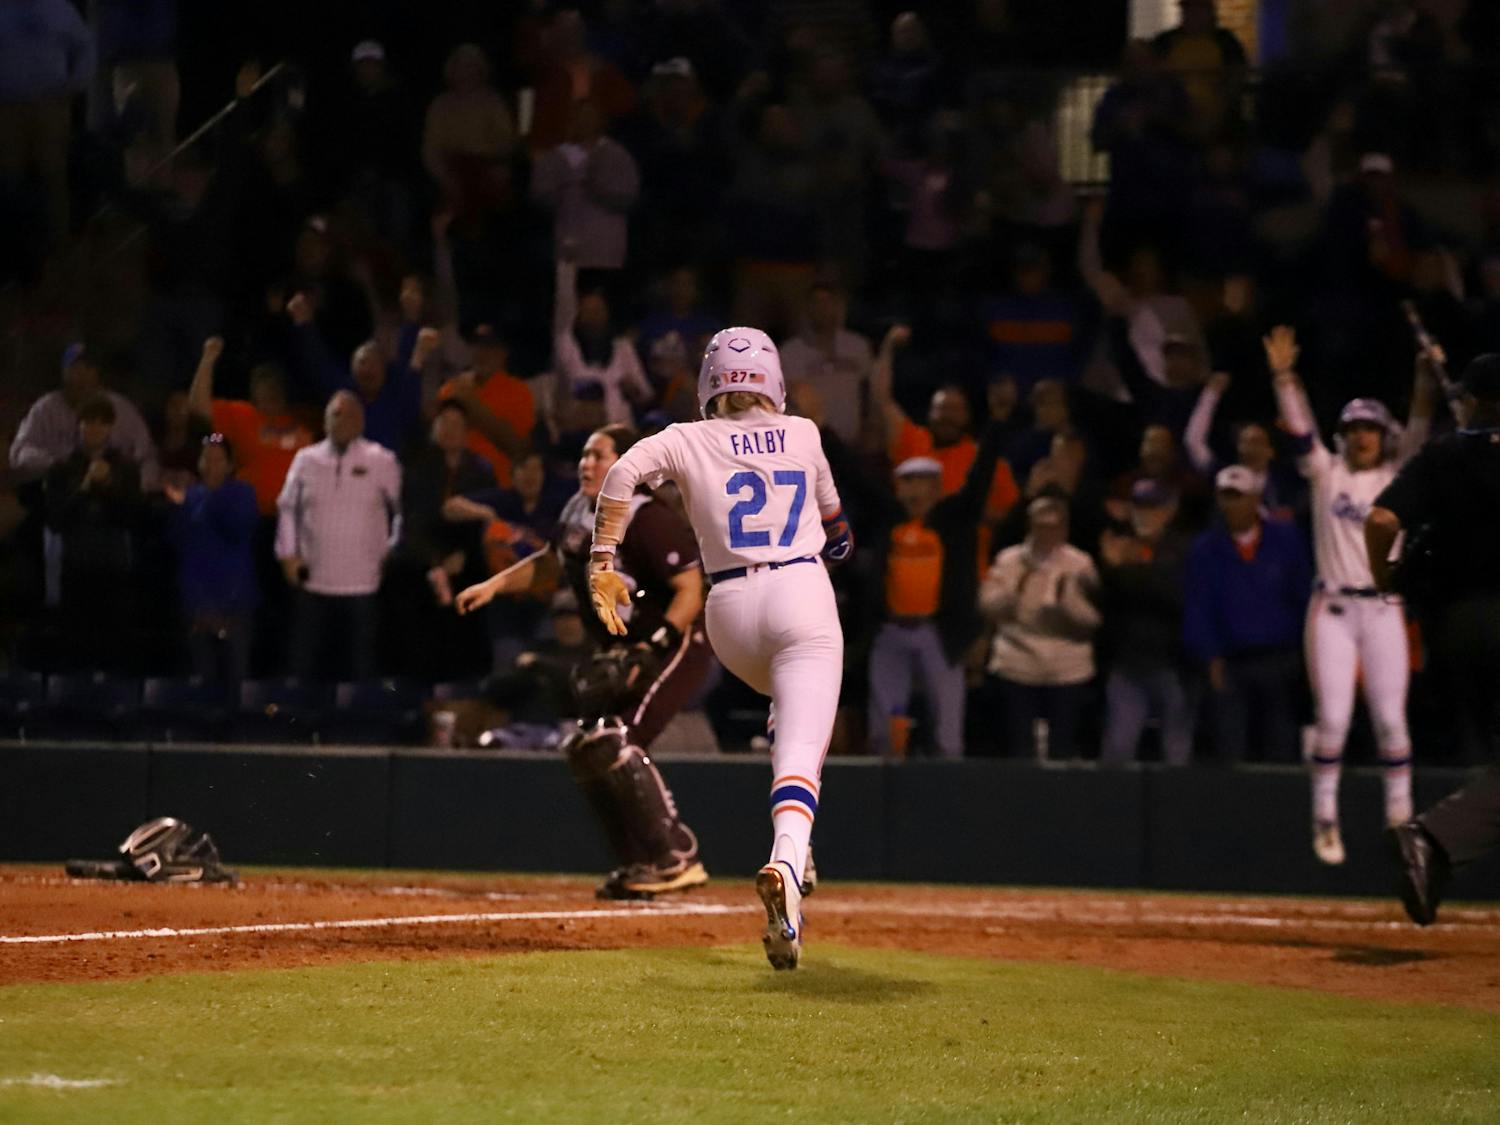 Florida freshman Kendra Falby crosses the plate during a matchup with Mississippi State, March 14. Florida fell to FSU by a score of 2-1 Tuesday.